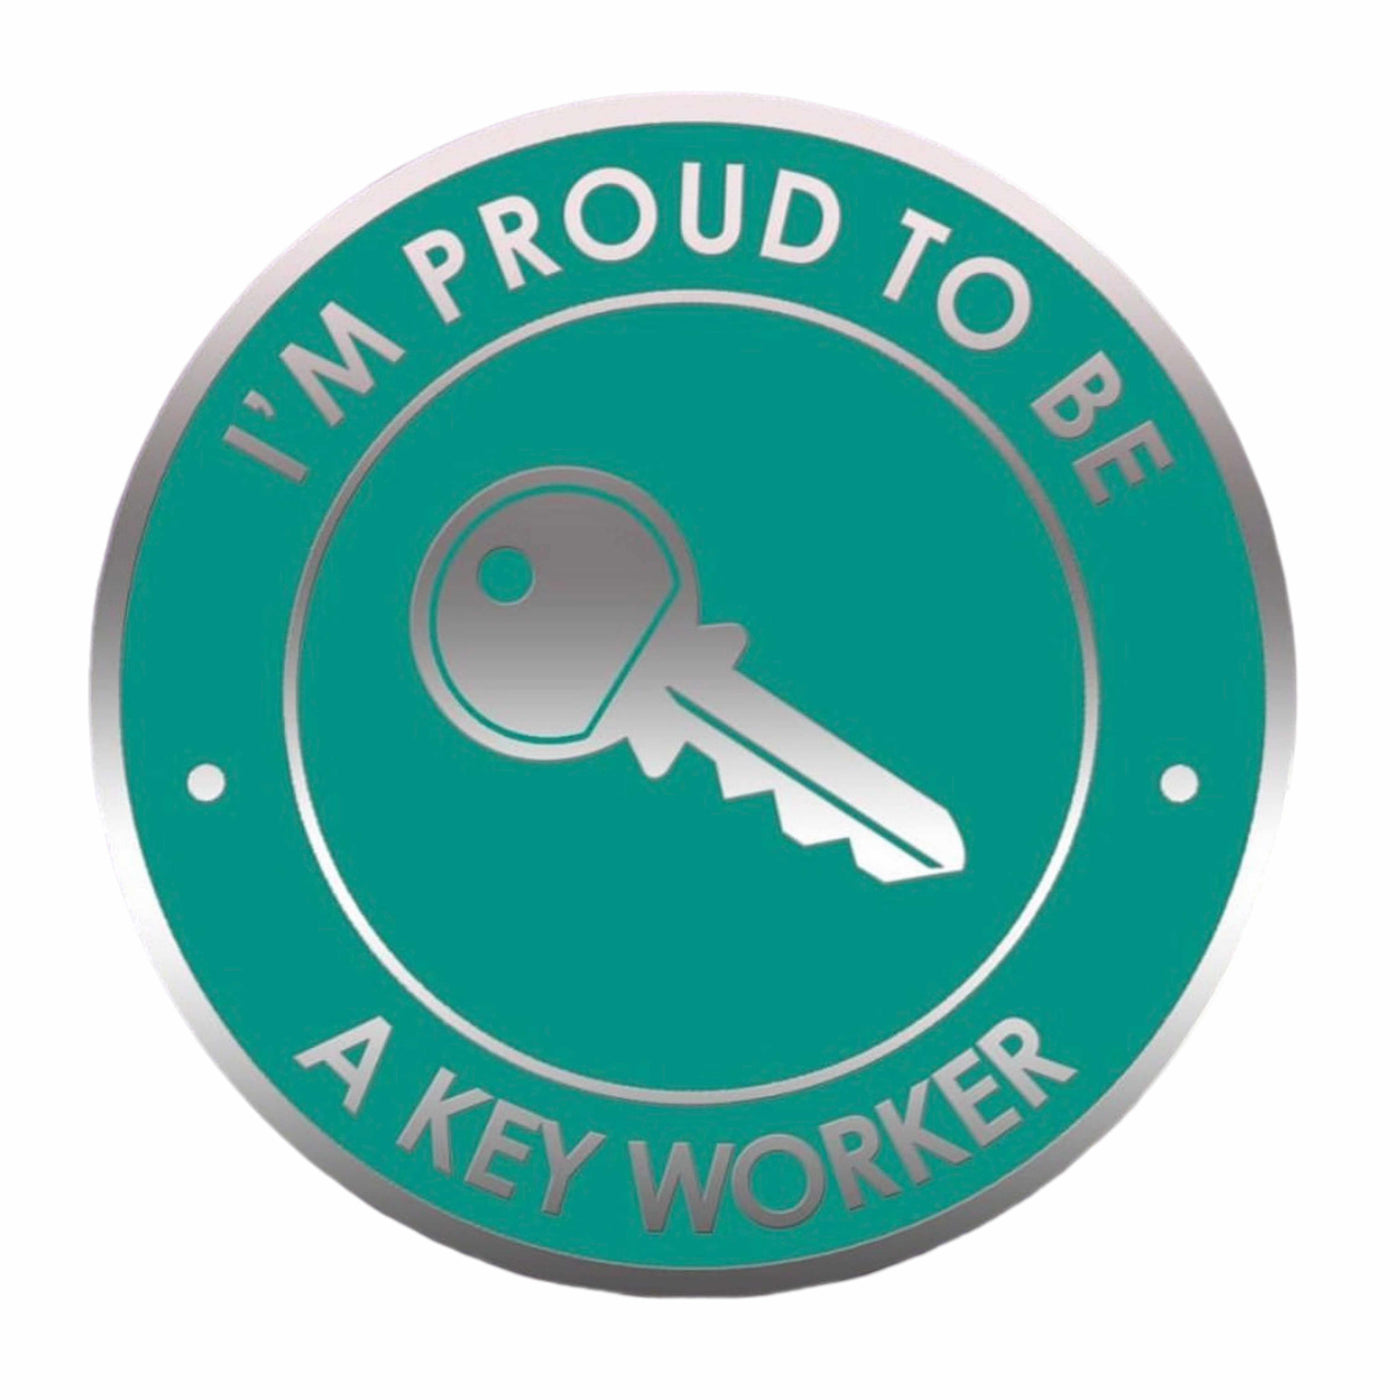 Proud to Be a Keyworker Pin Badge